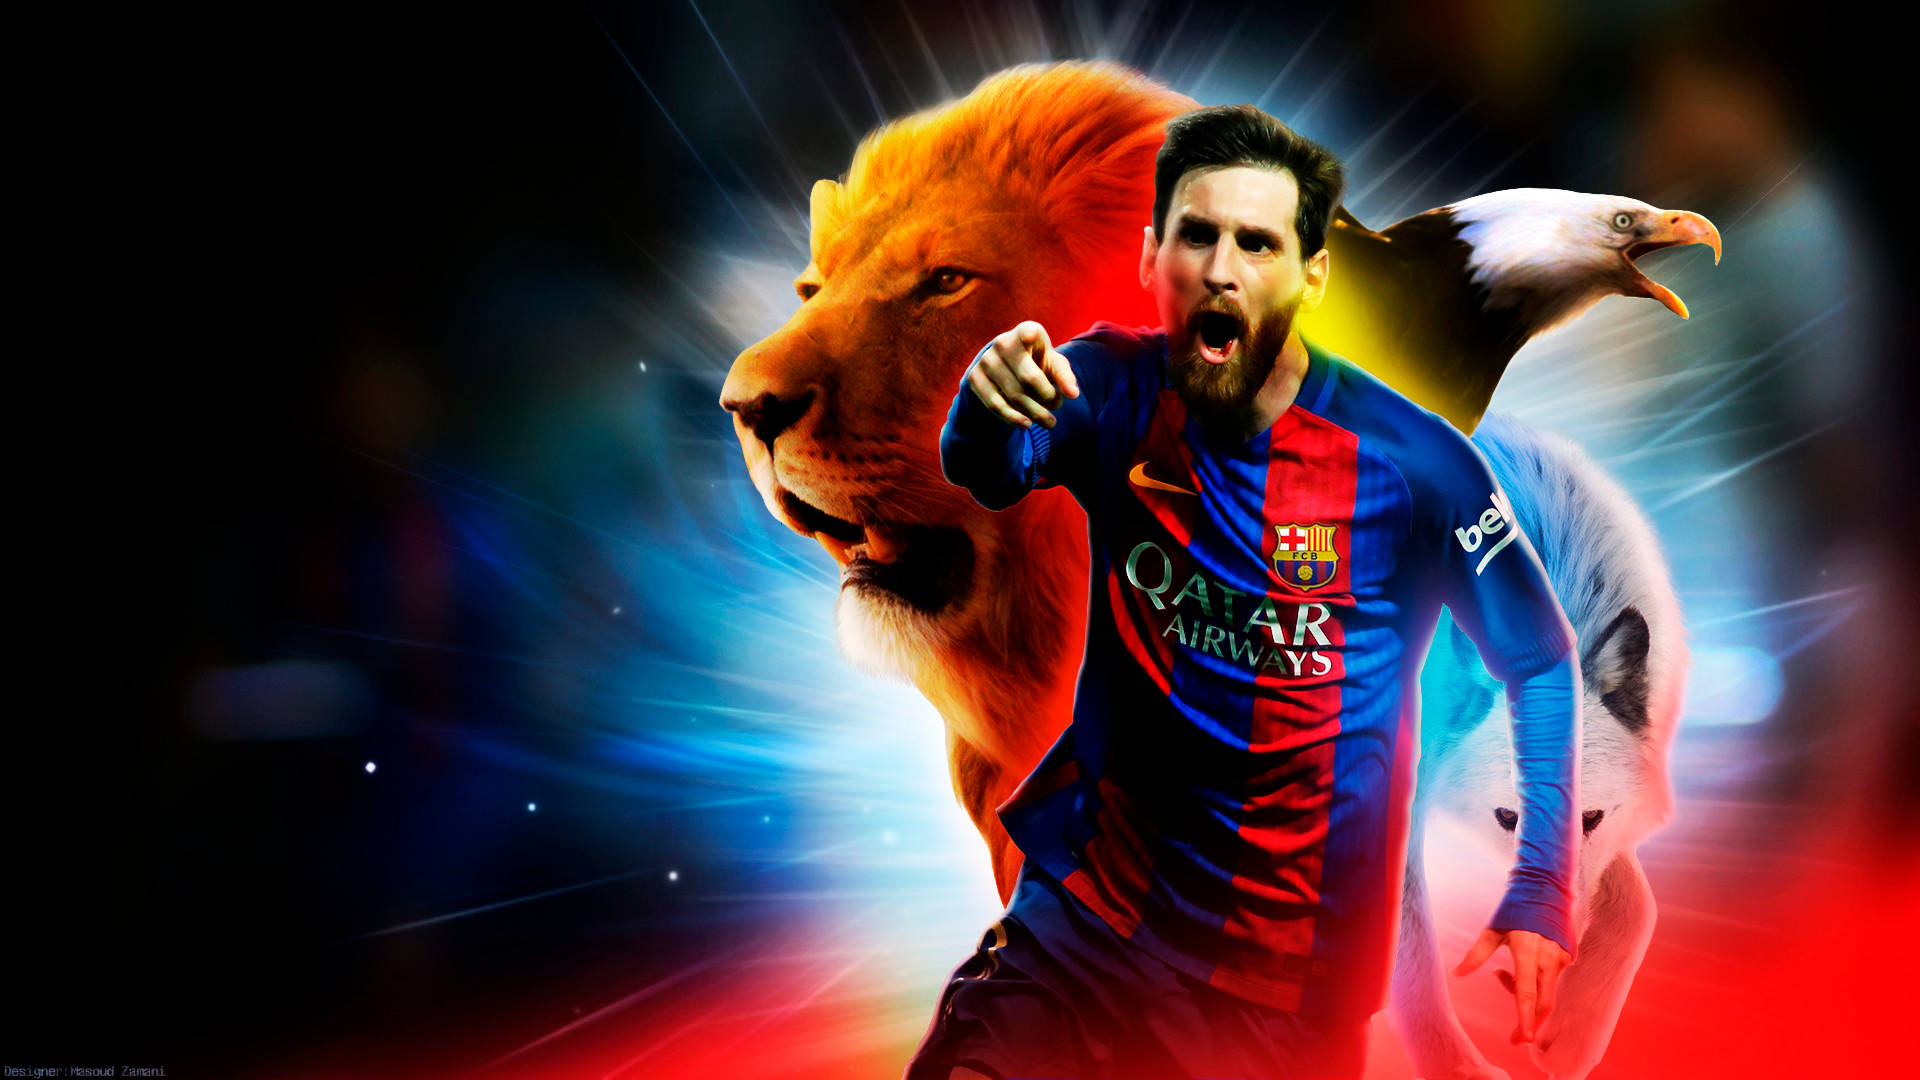 Messi 1920X1080 Wallpaper and Background Image